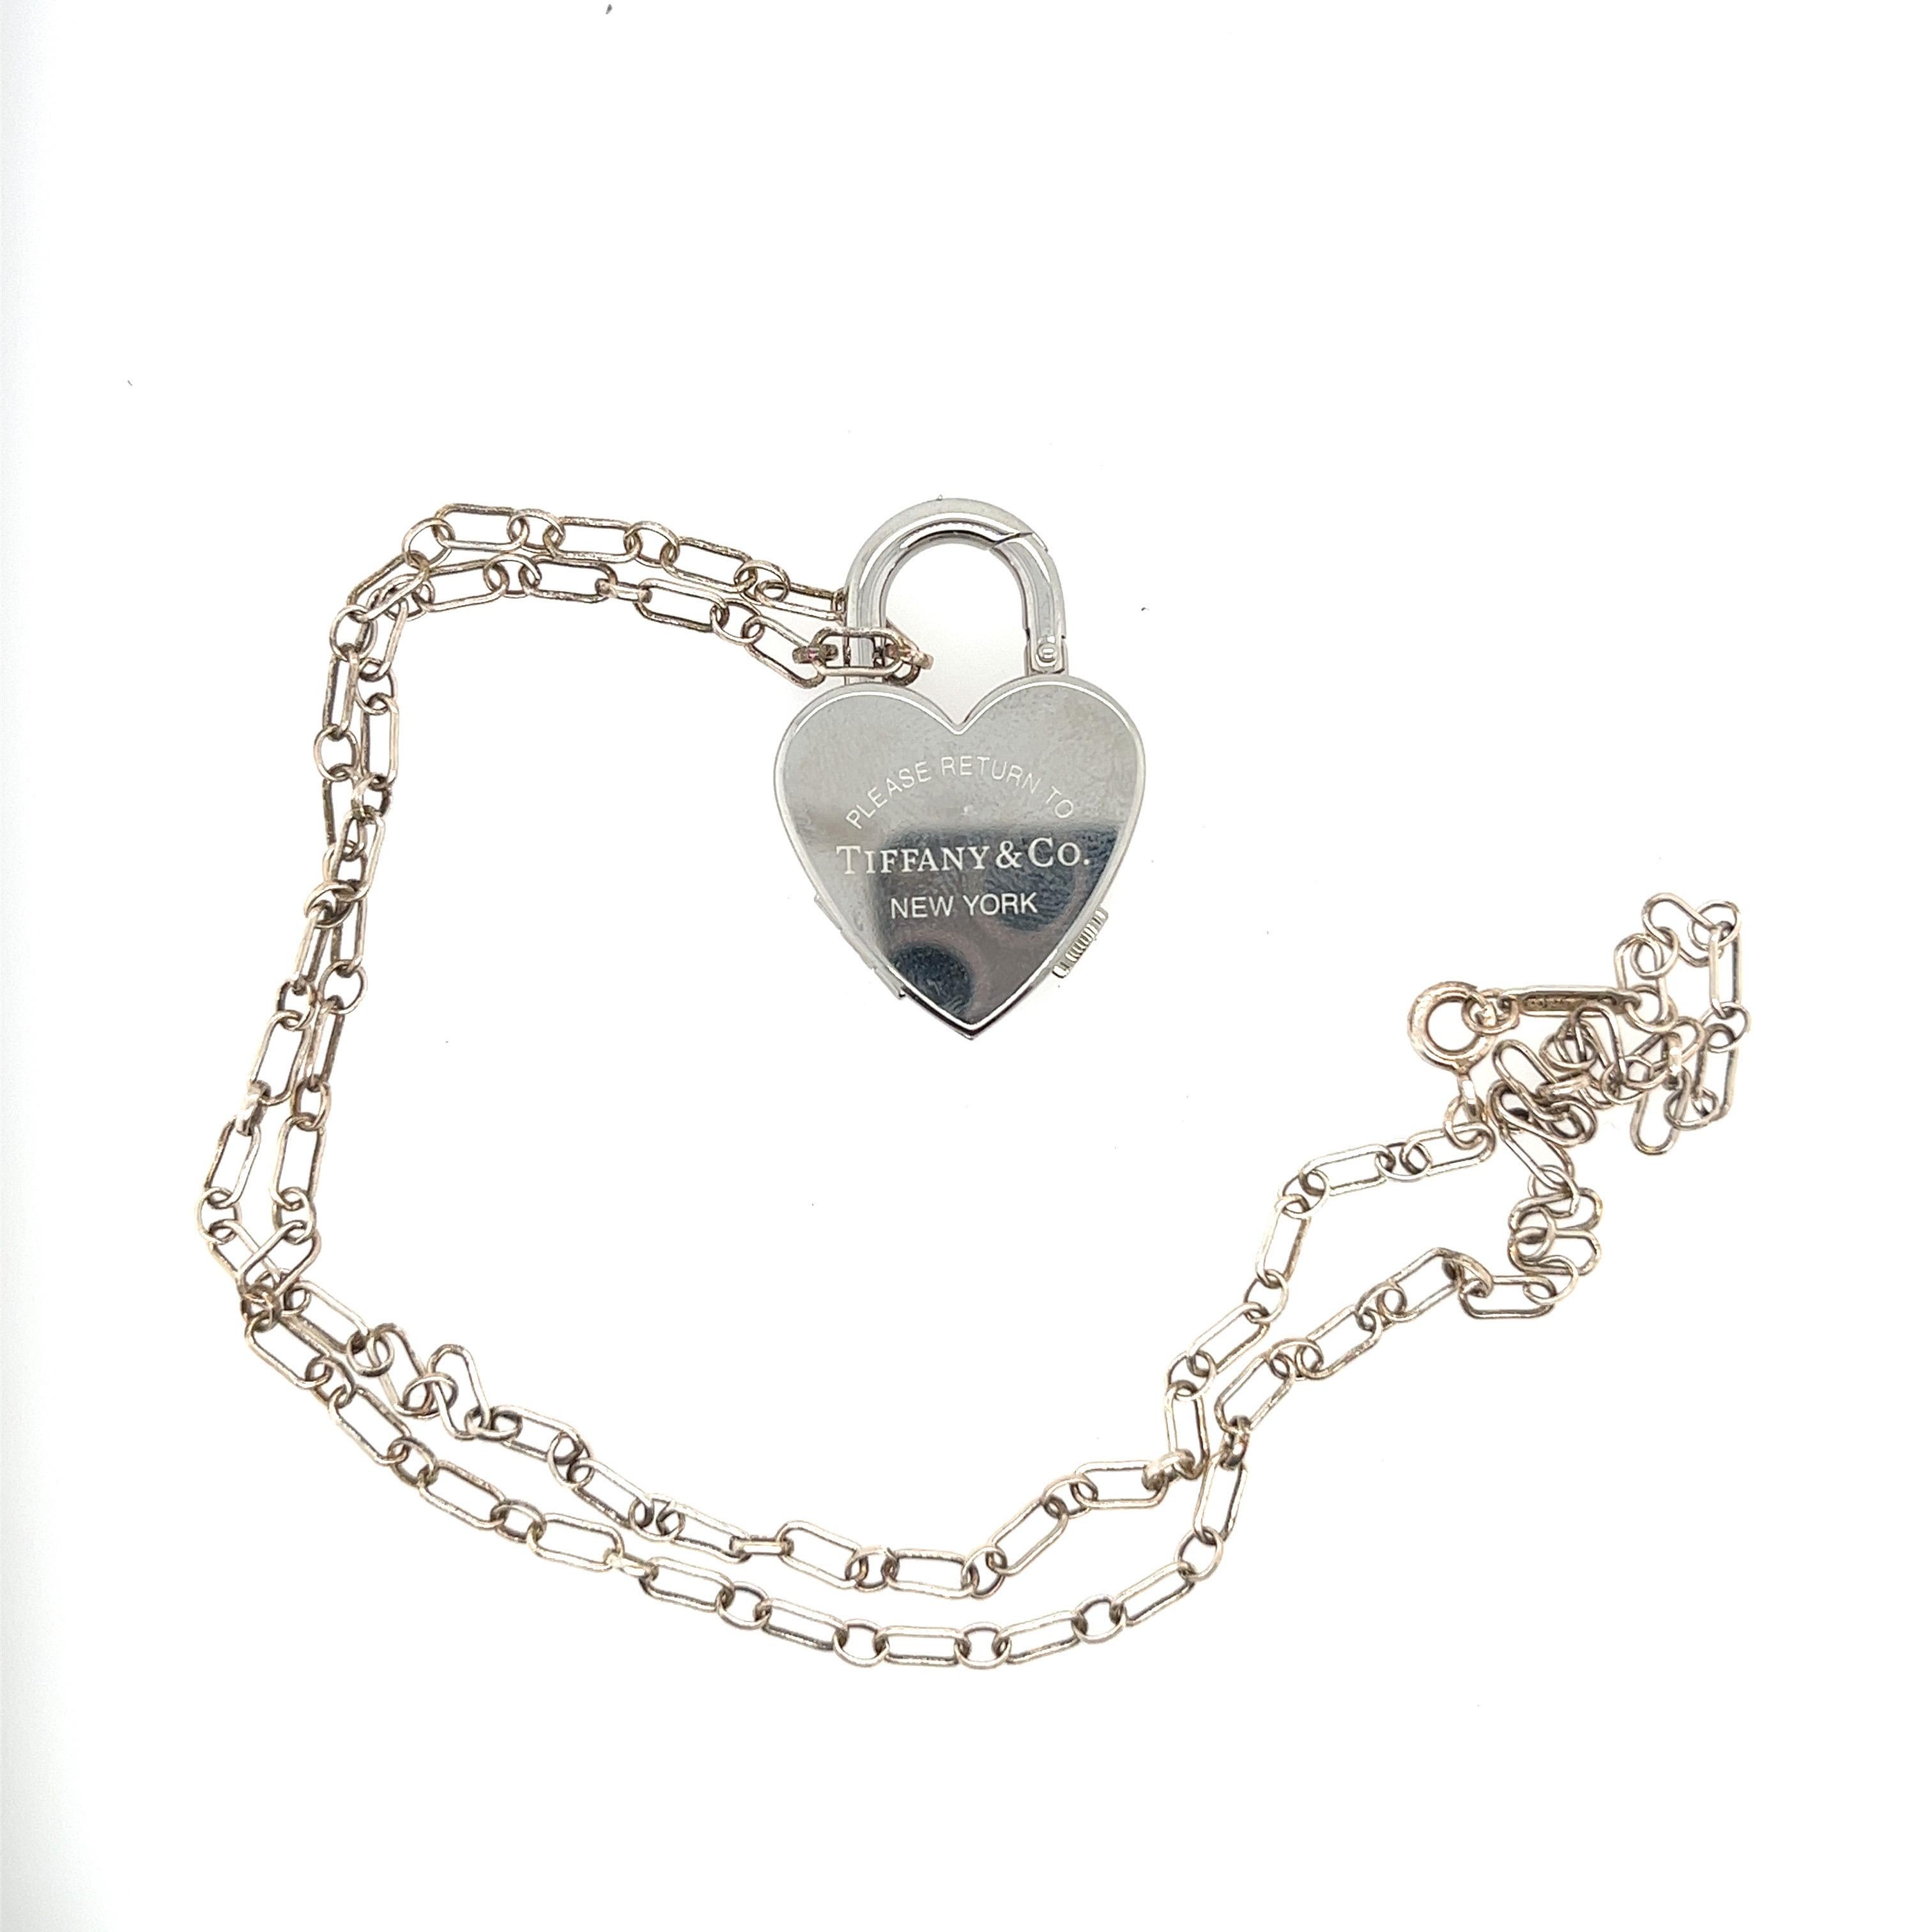 From Return to Tiffany Co comes this unique piece. It is made of 925 sterling silver with Swiss made stainless steel.
Comes with a chain link necklace and removable padlock watch charm. Engraved on the back with Tiffany & Co trademark. It has a